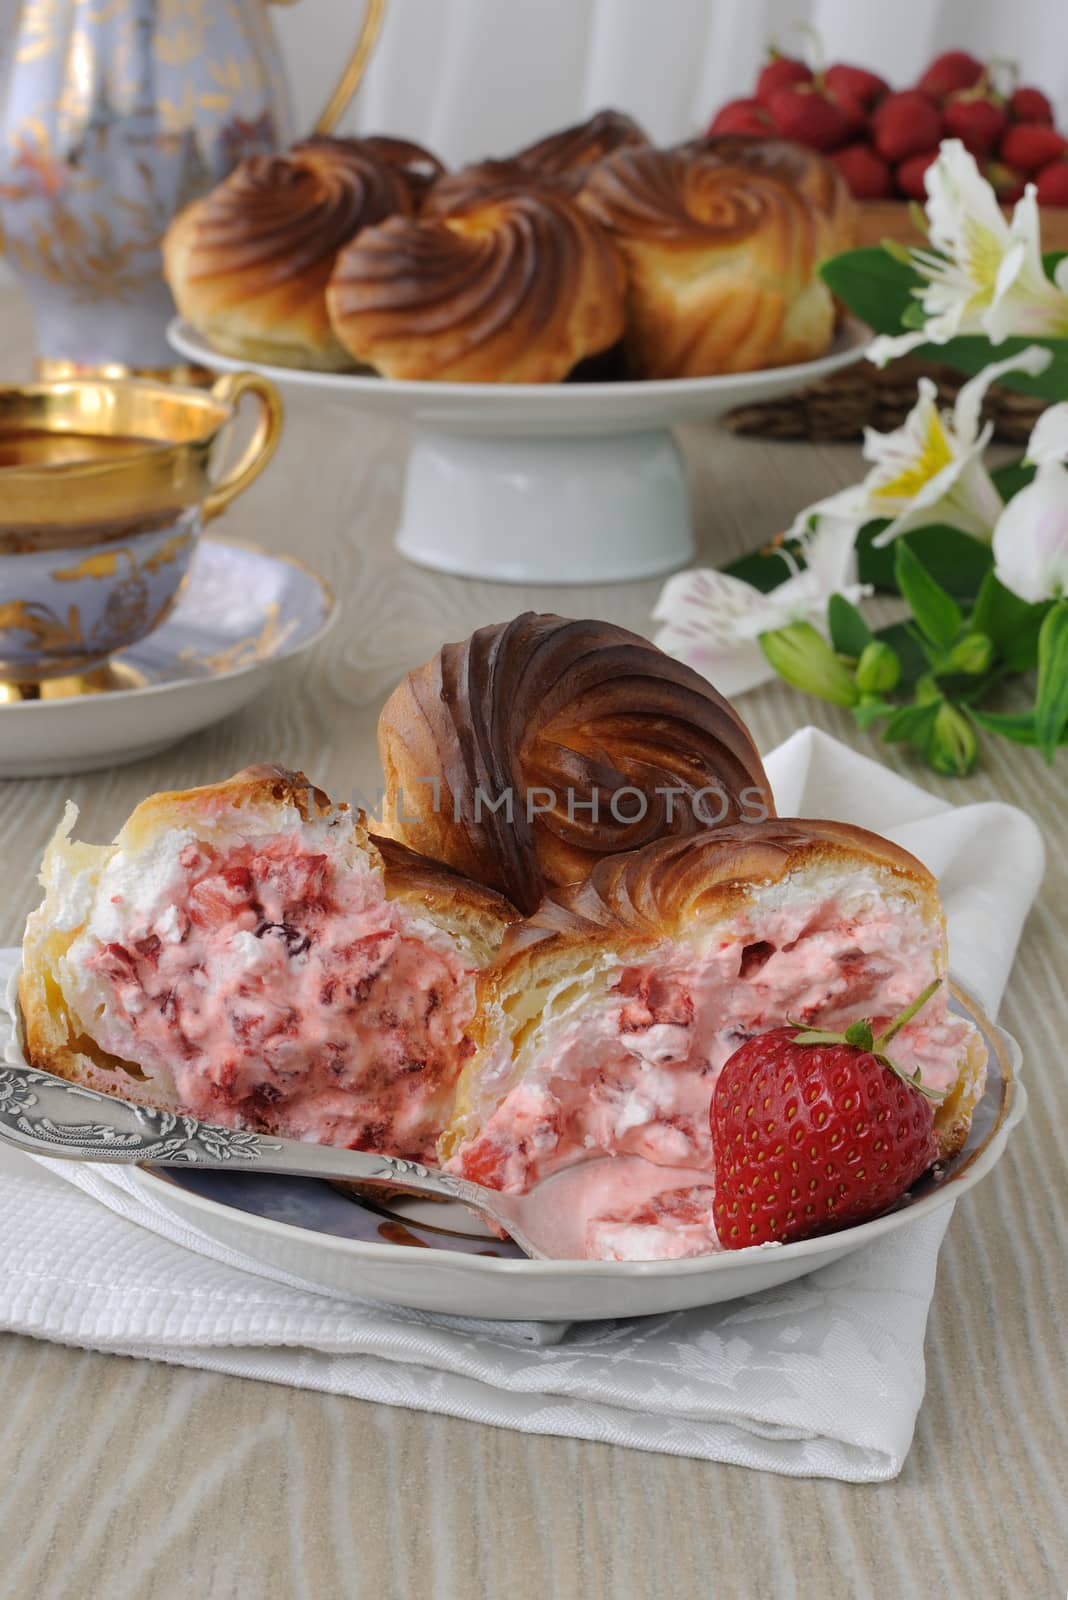 éclairs    with cream filling and slices of fresh strawberries